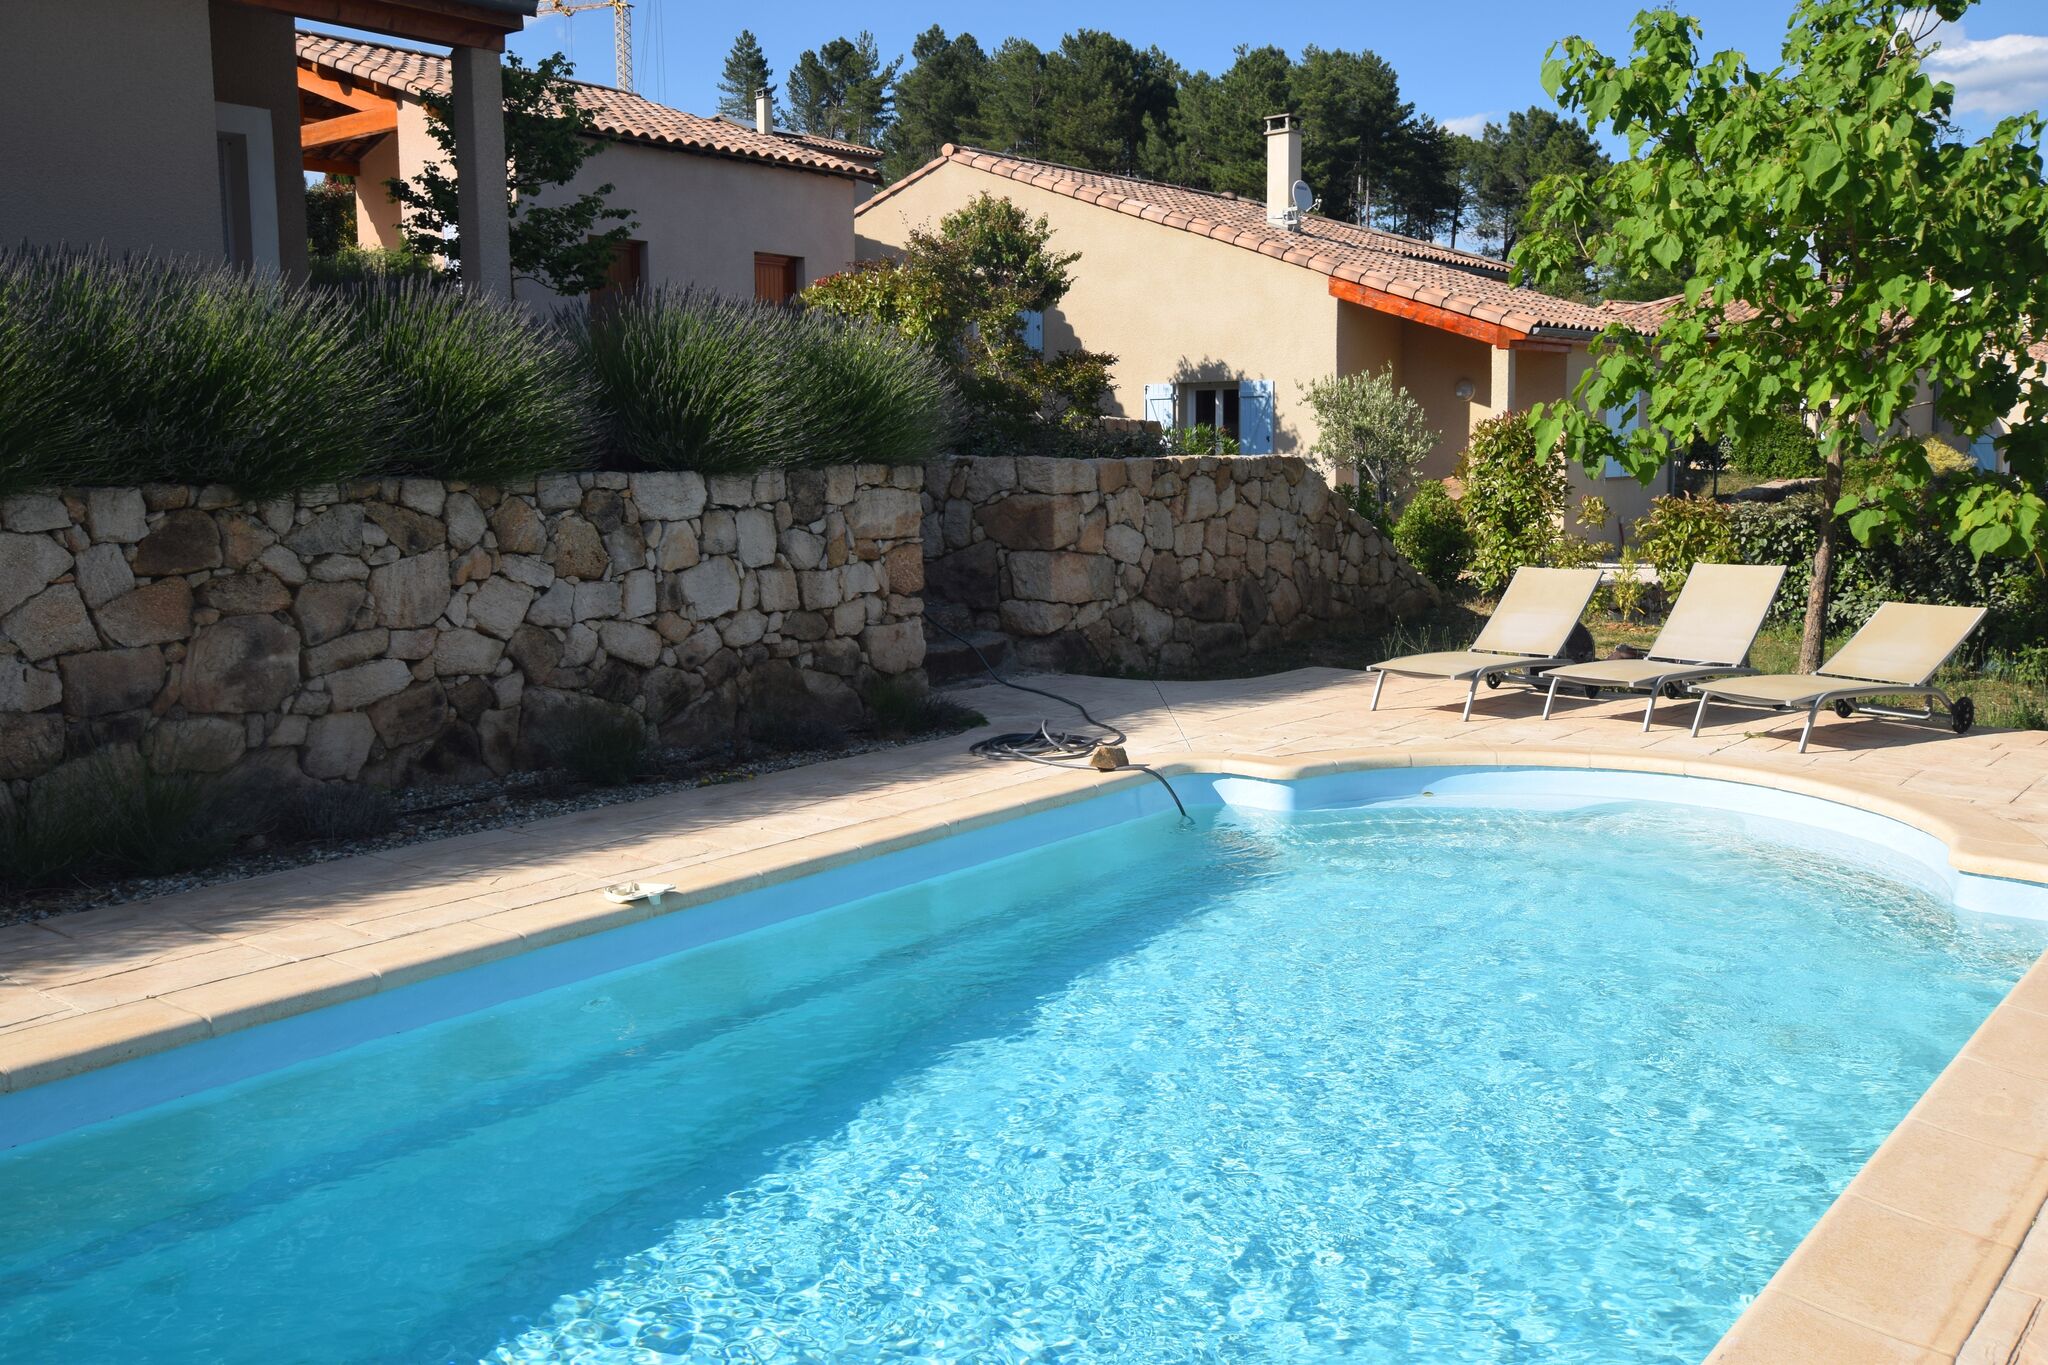 Lovely villa in Joyeuse with private swimming pool